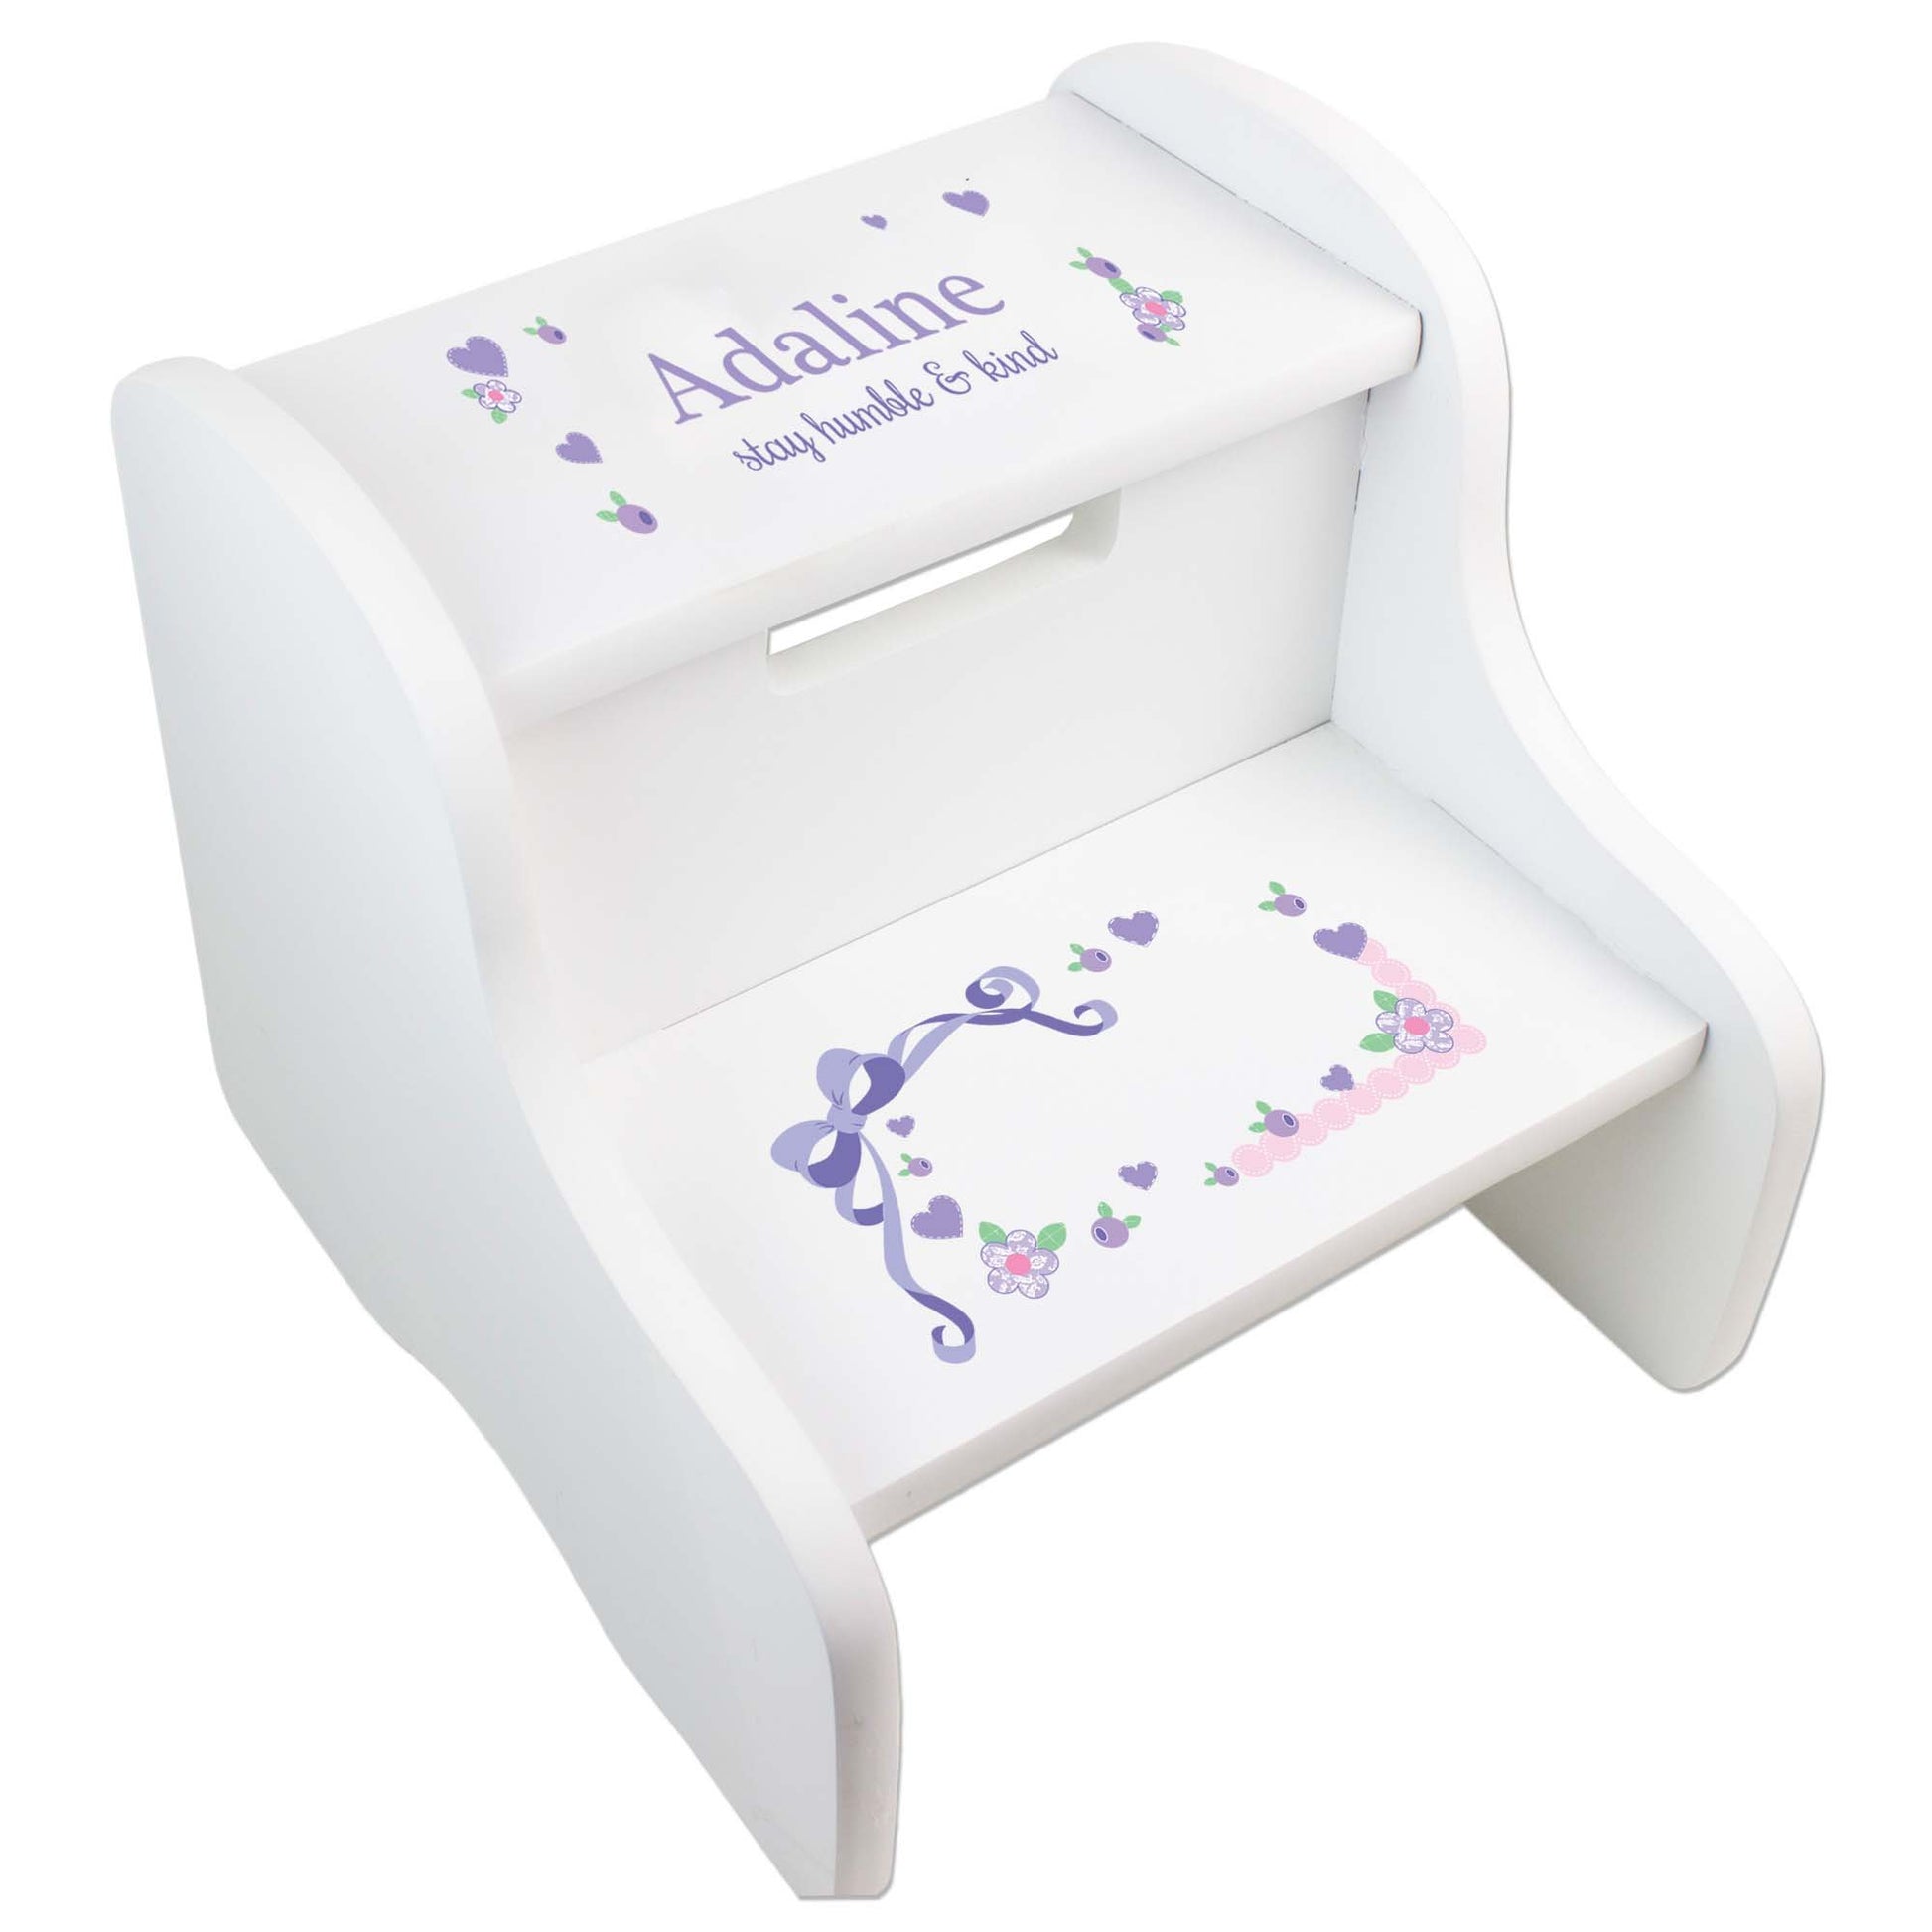 Personalized White Step Stool With Pink Bow Design